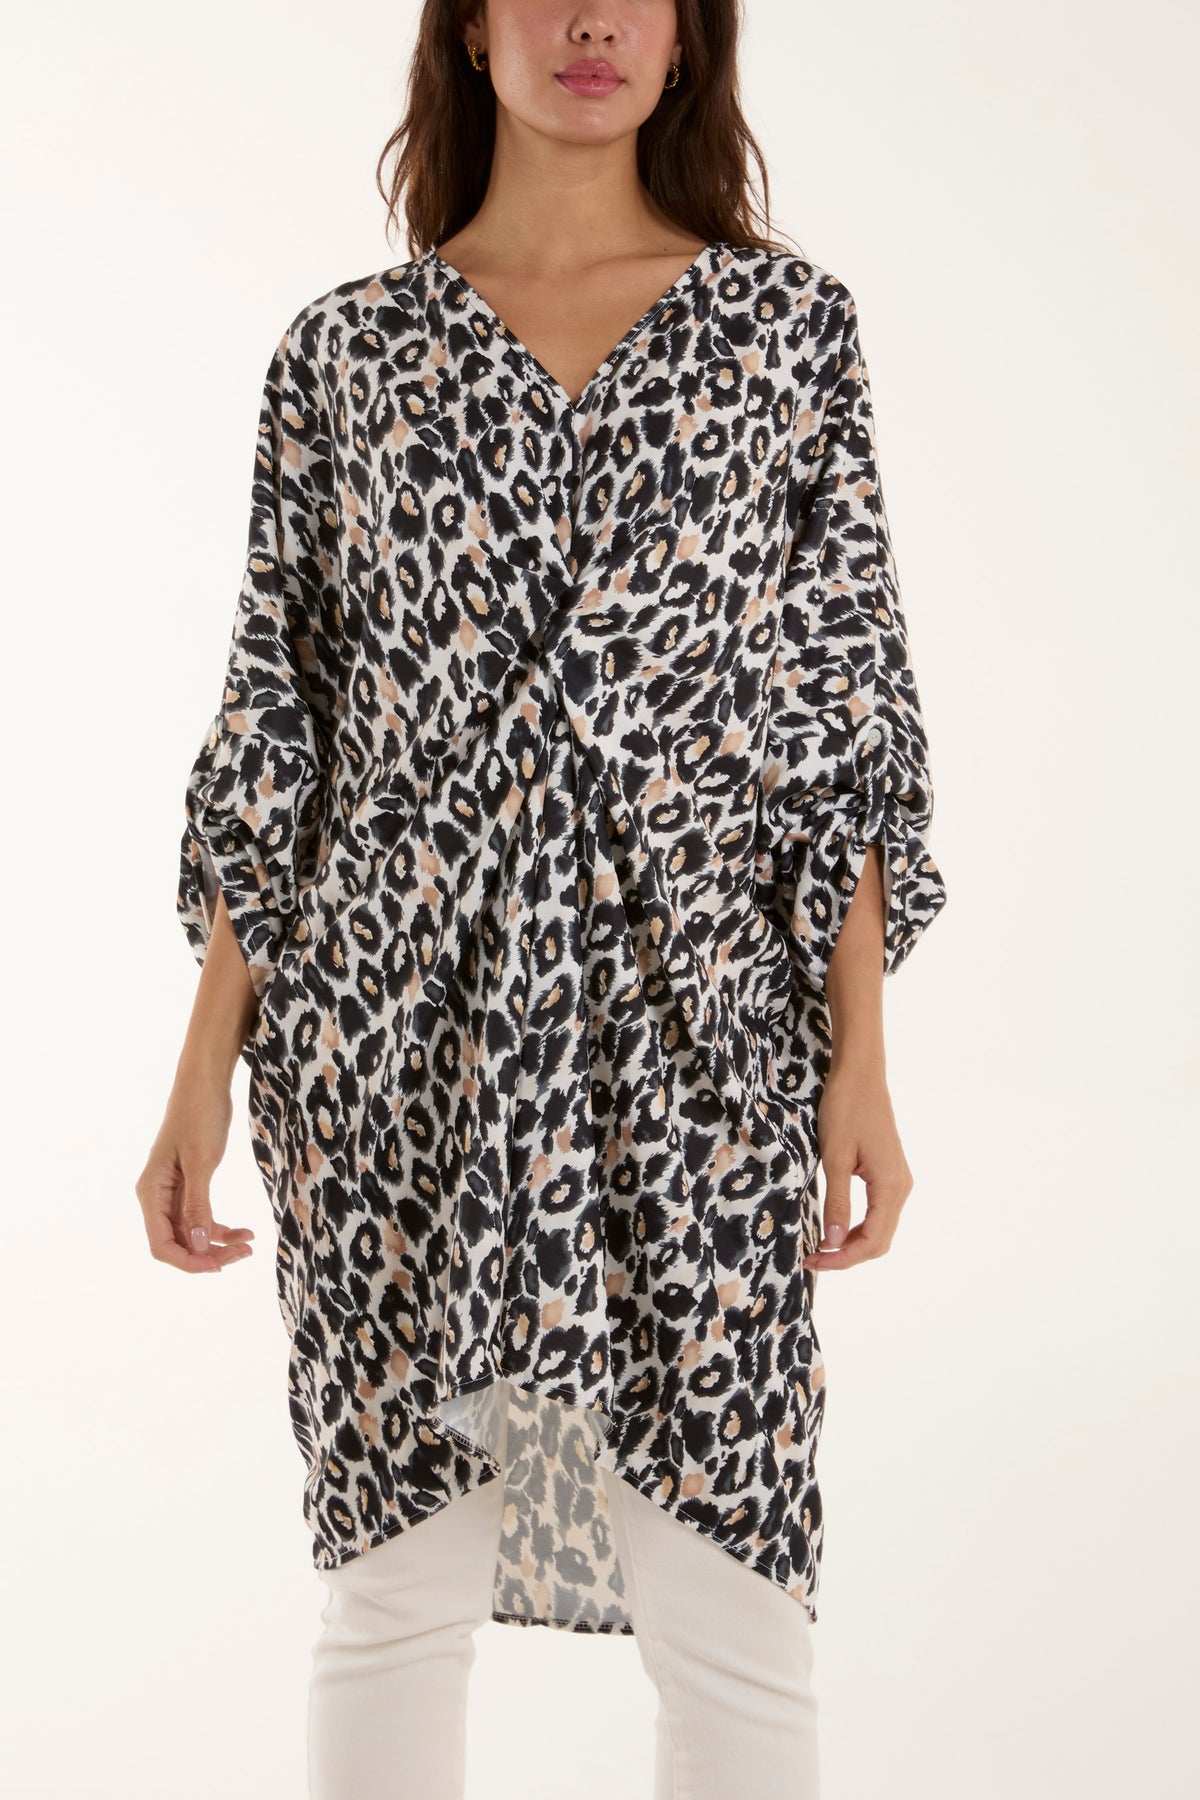 Leopard Print Twisted Front Blouse